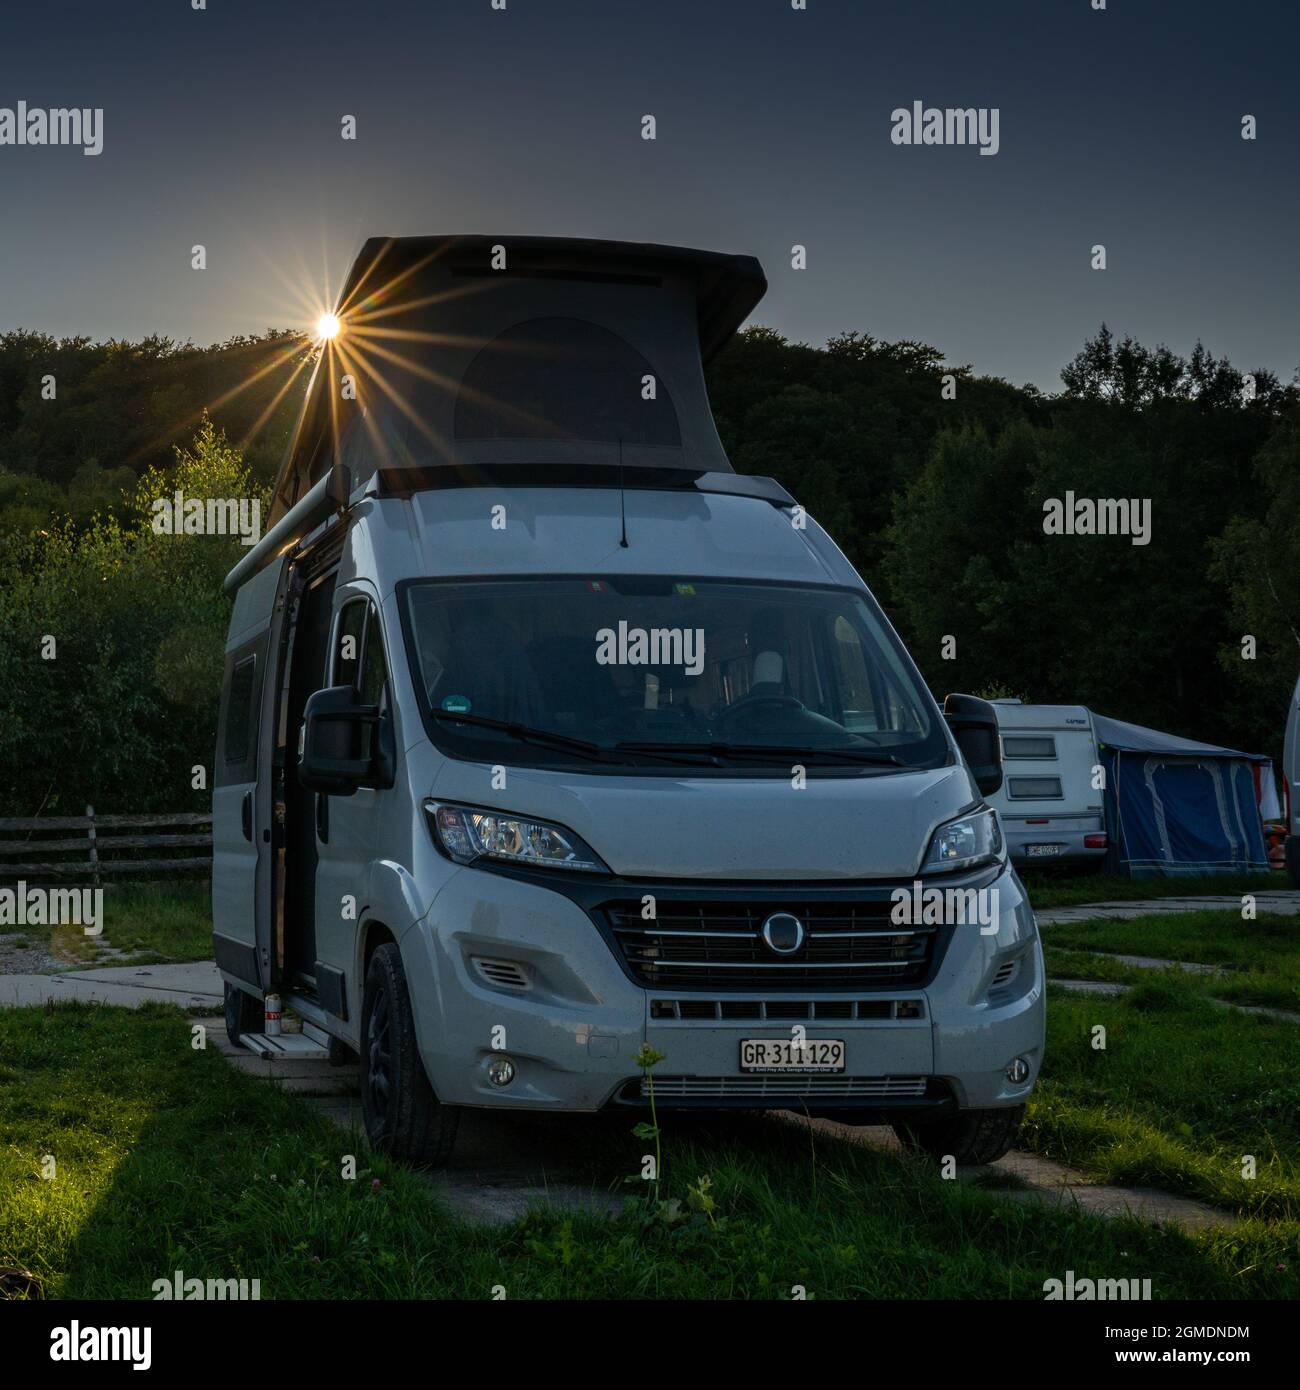 Wejherowo, Poland - 2 September, 2021: gray camper van with a pop-up roof  parked in a campground with evening light and a sun star Stock Photo - Alamy